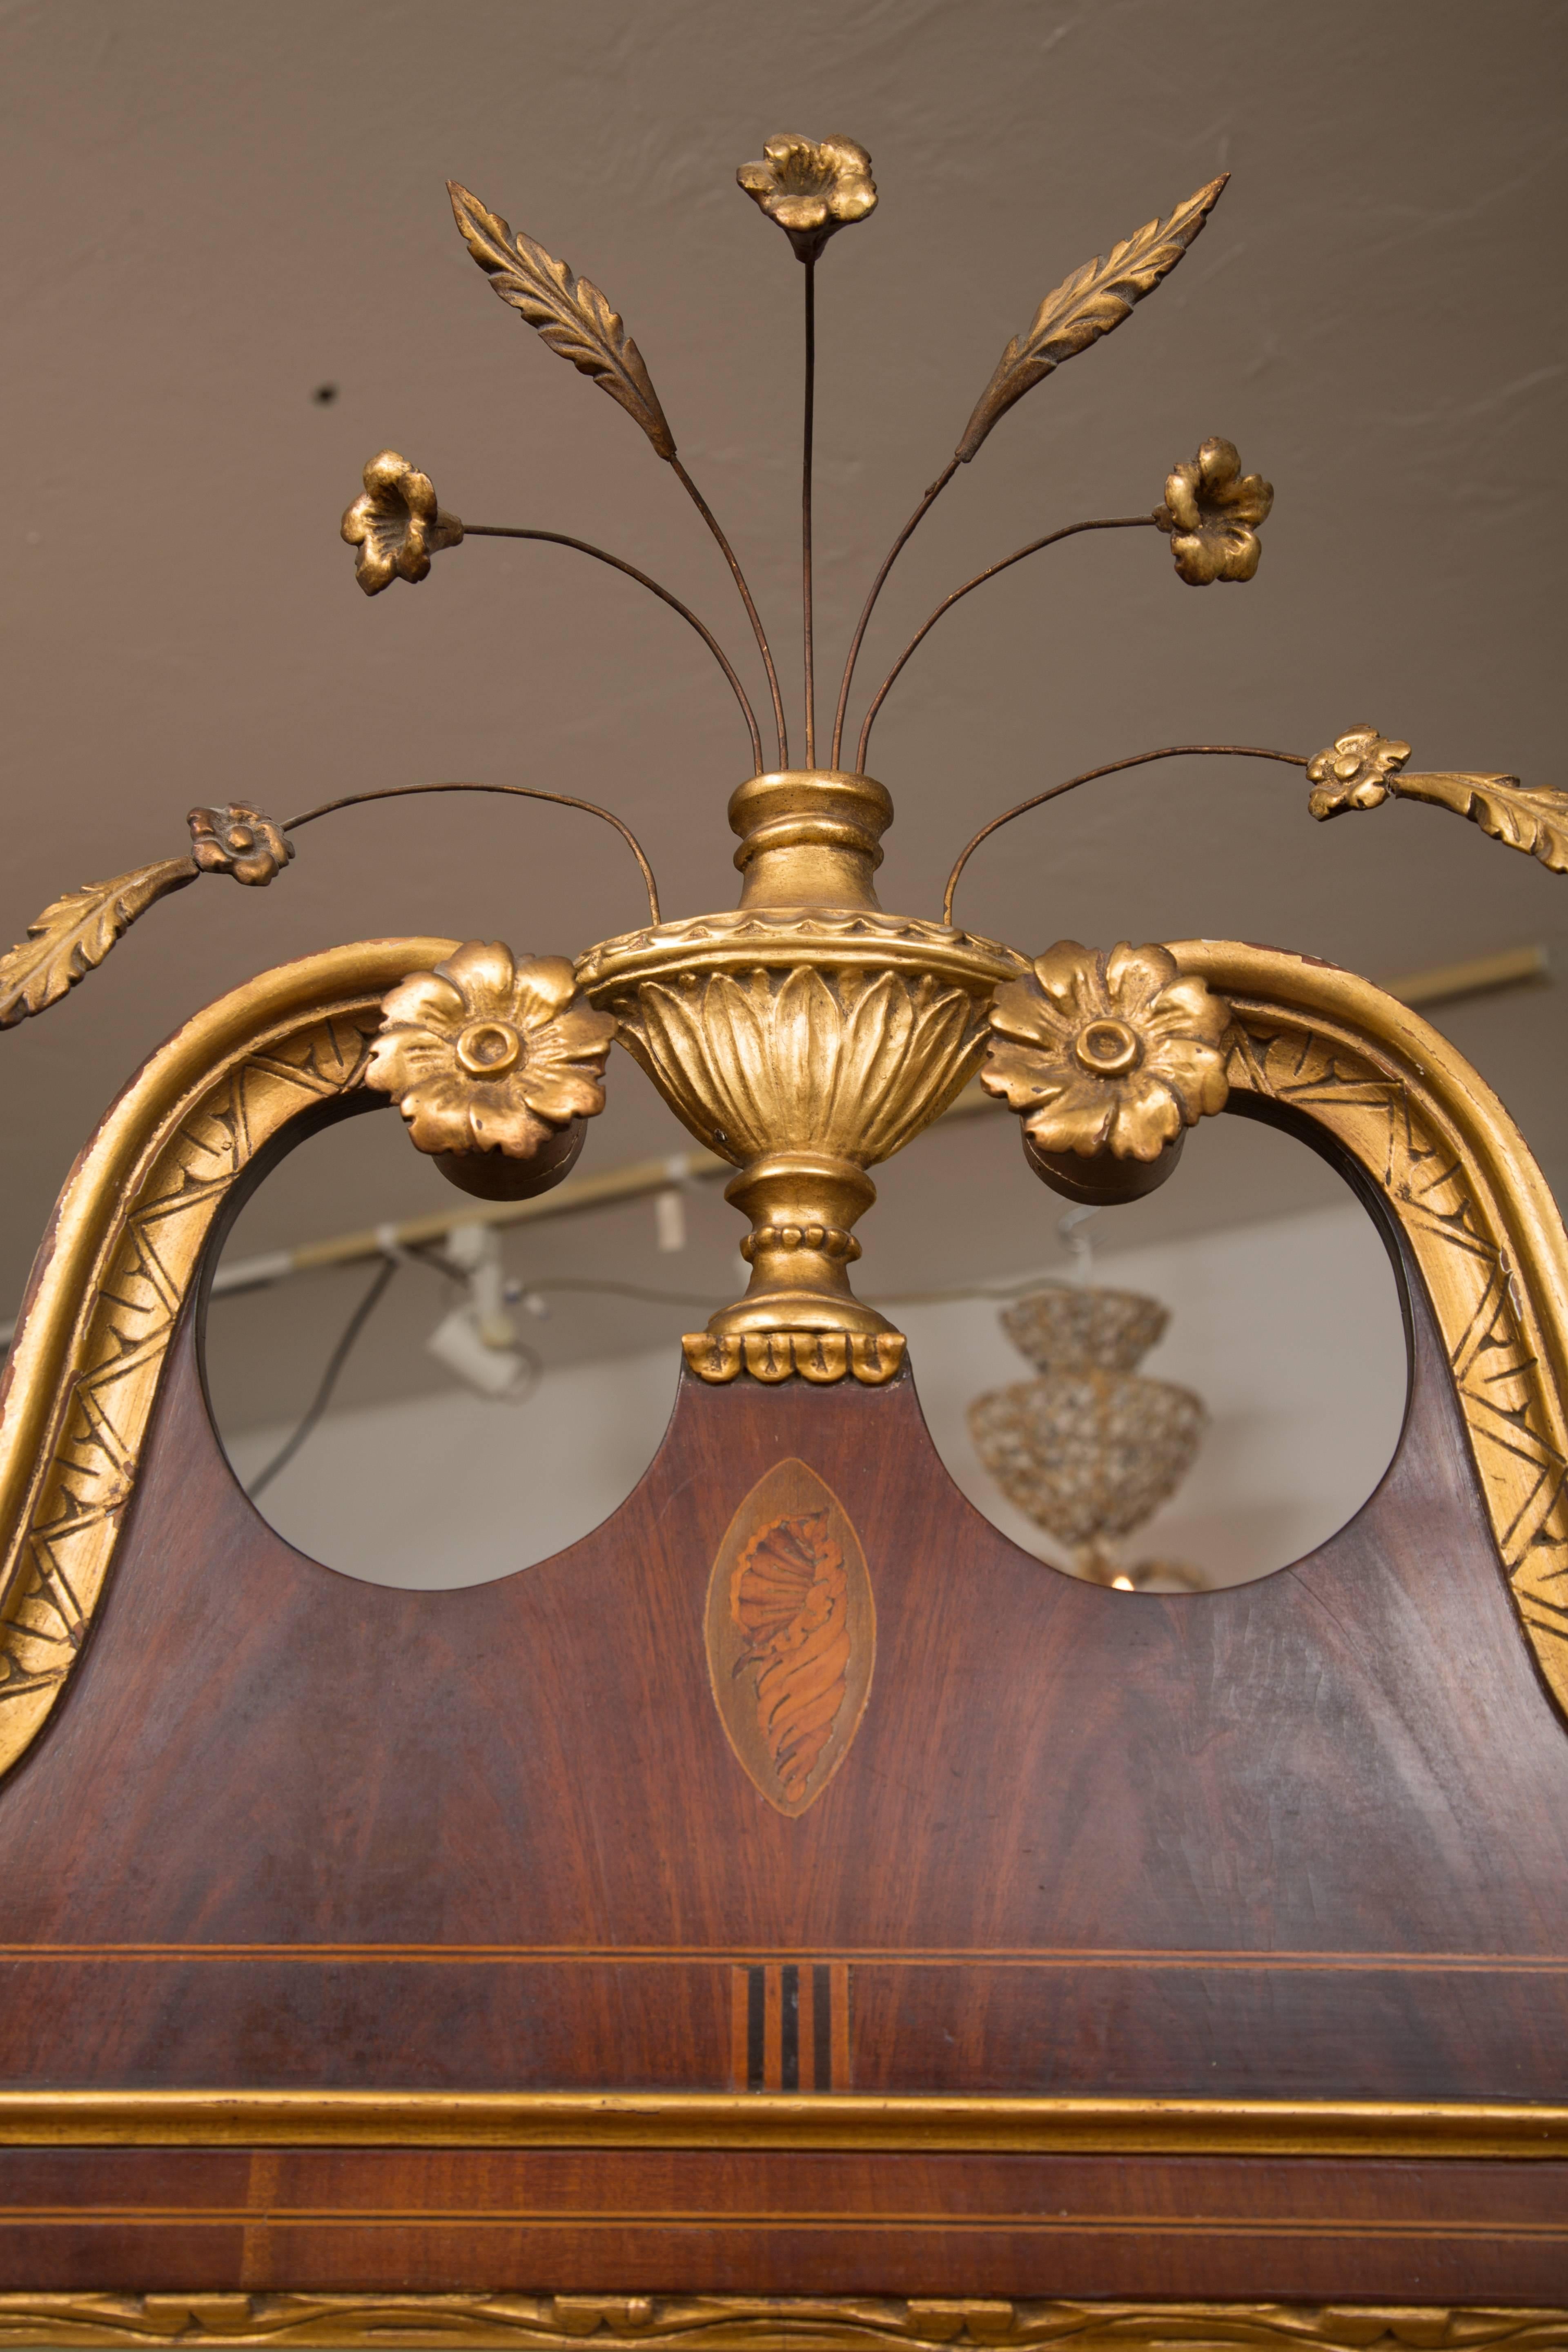 This is a Classic example of an American Federal style mahogany mirror with a prominent, yet graceful, swan neck pediment centered by a flowering urn above a églomisé panel over a rectangular mirror plate. The plate mirror is flanked by trailing